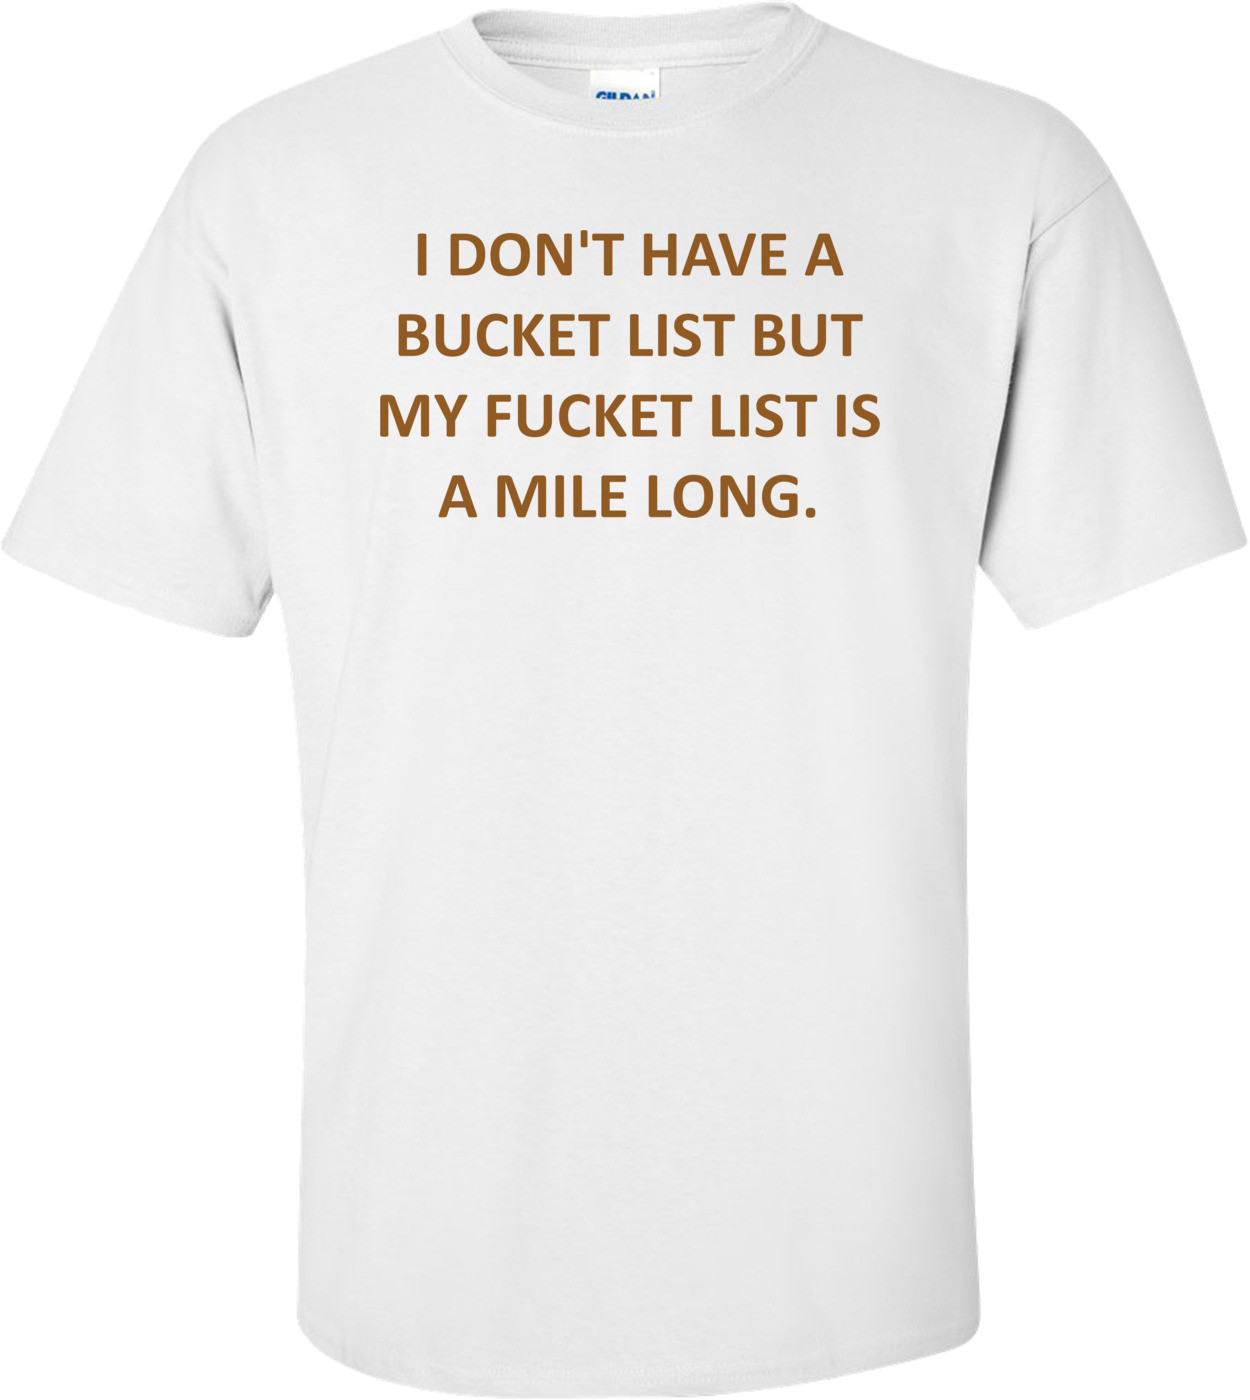 I DON'T HAVE A BUCKET LIST BUT MY FUCKET LIST IS A MILE LONG. Shirt